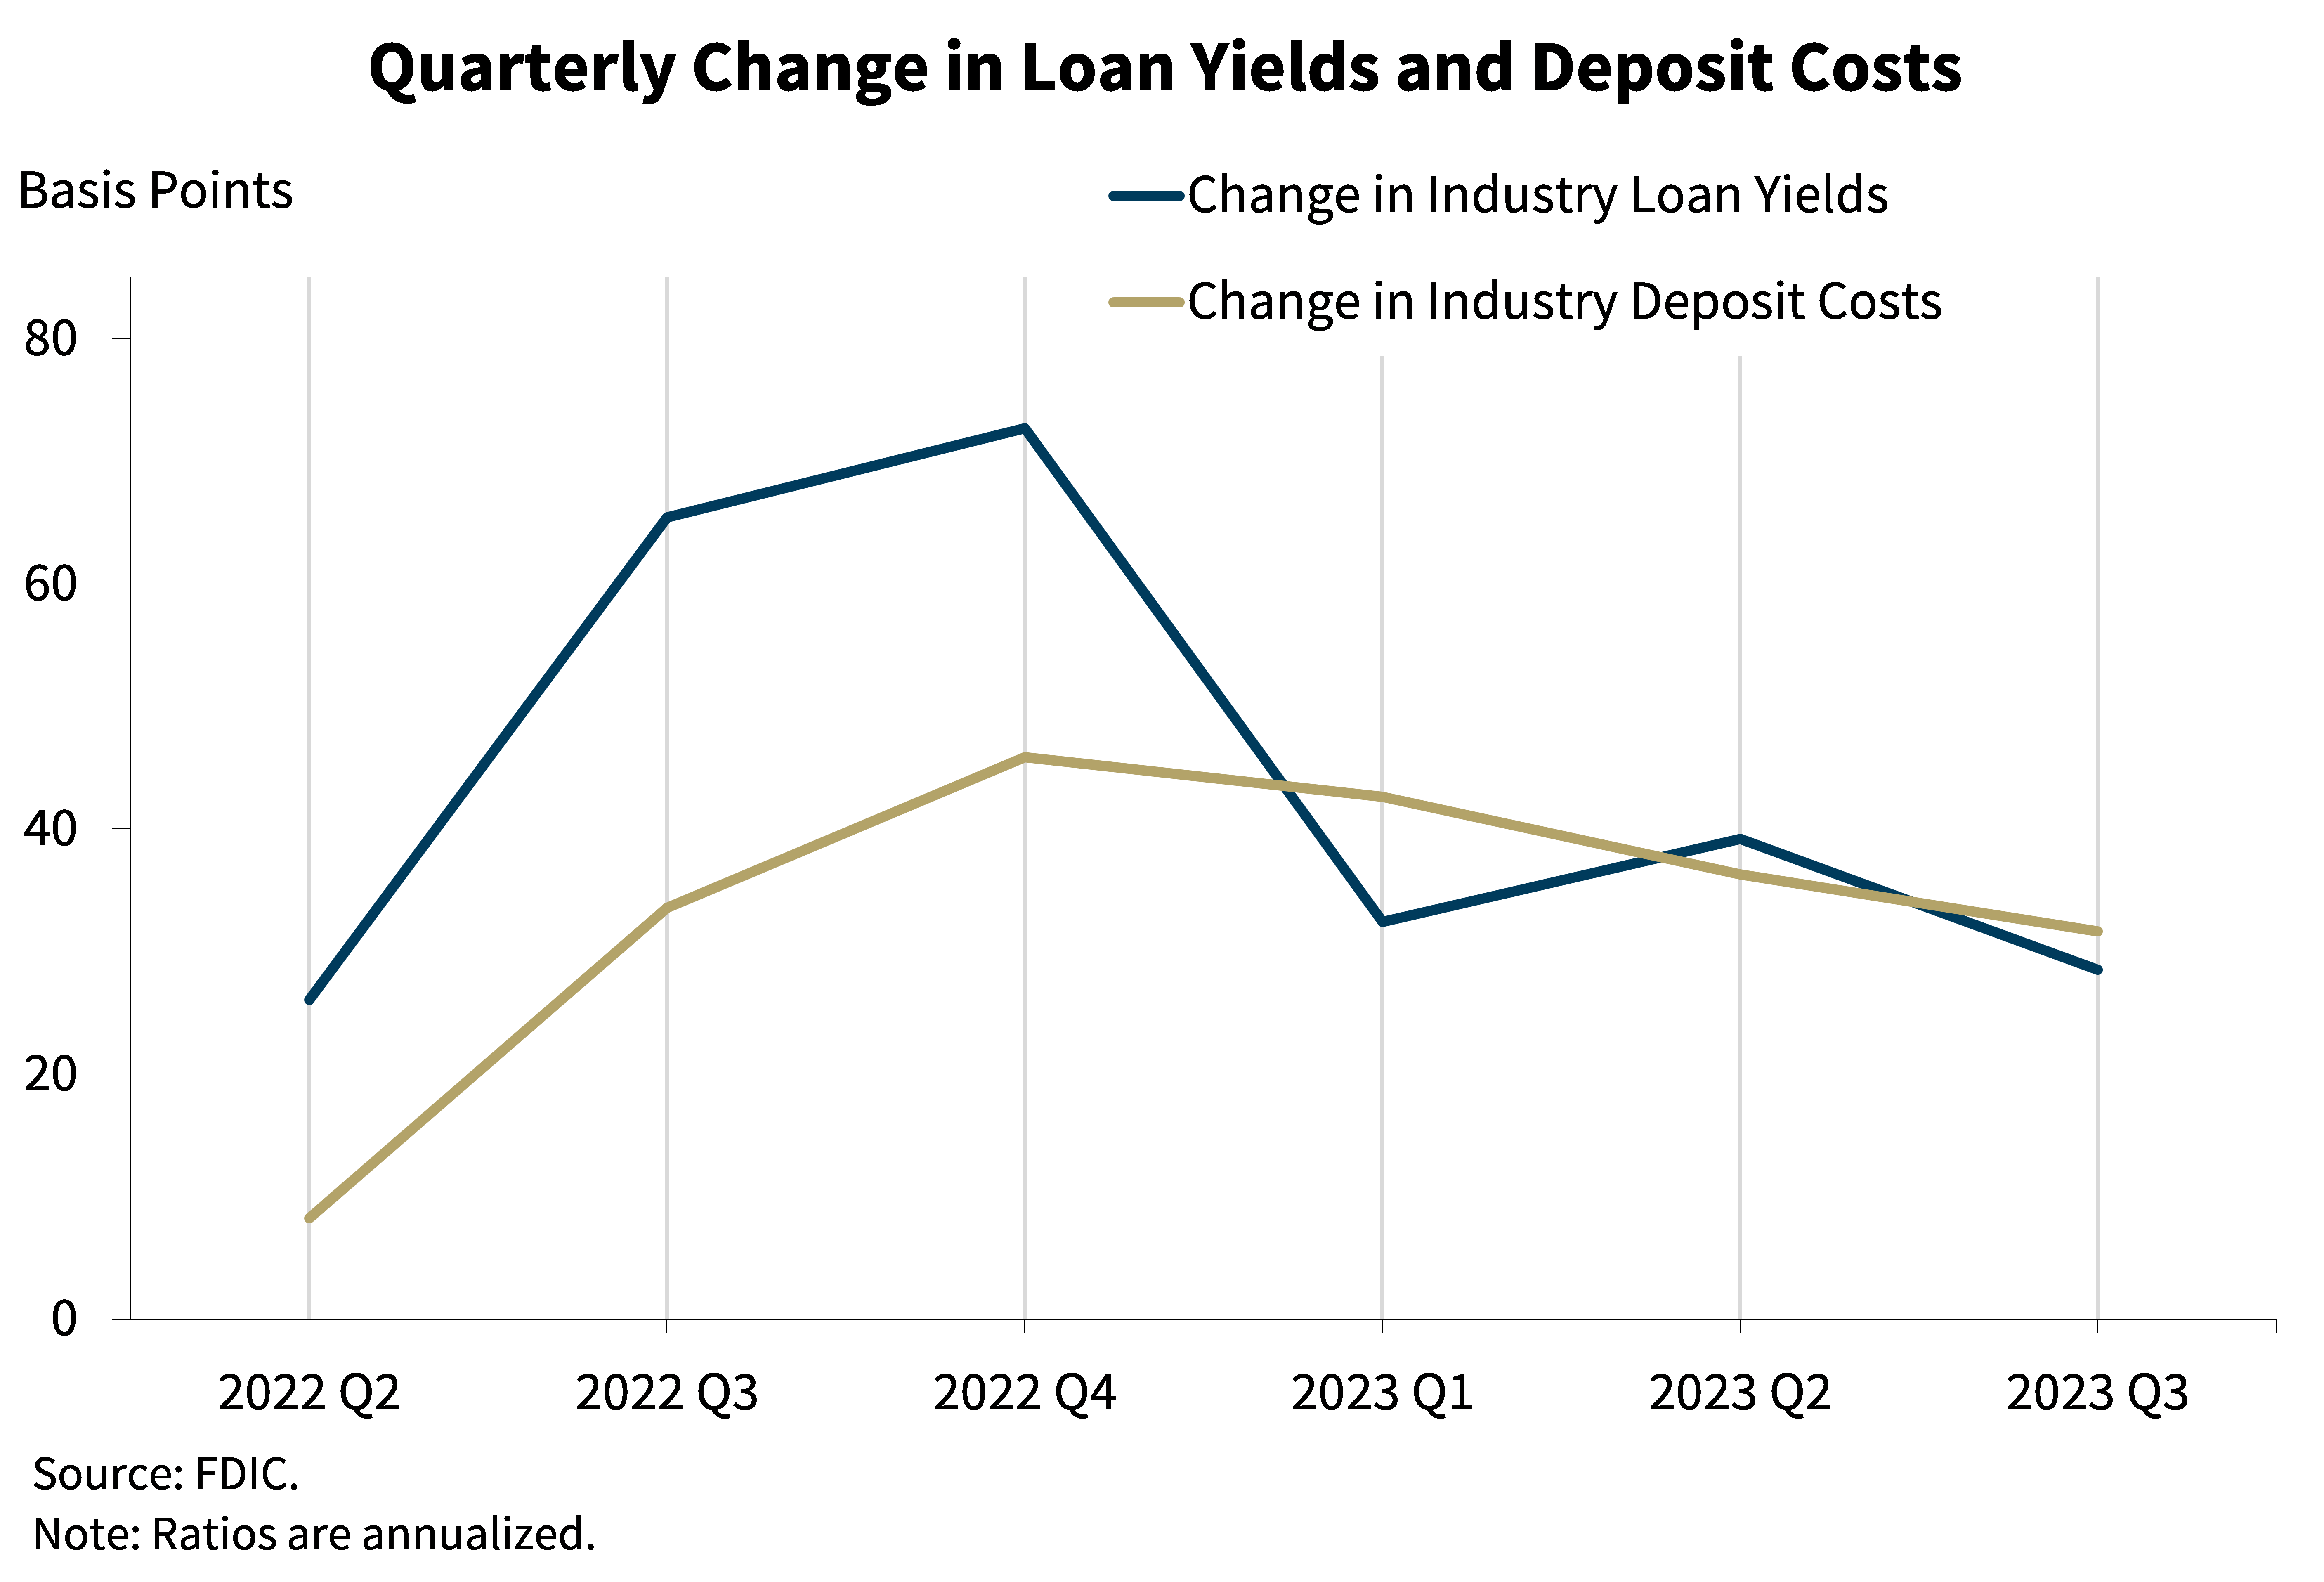 Chart 4: Quarterly Change in Loan Yields and Deposit Costs